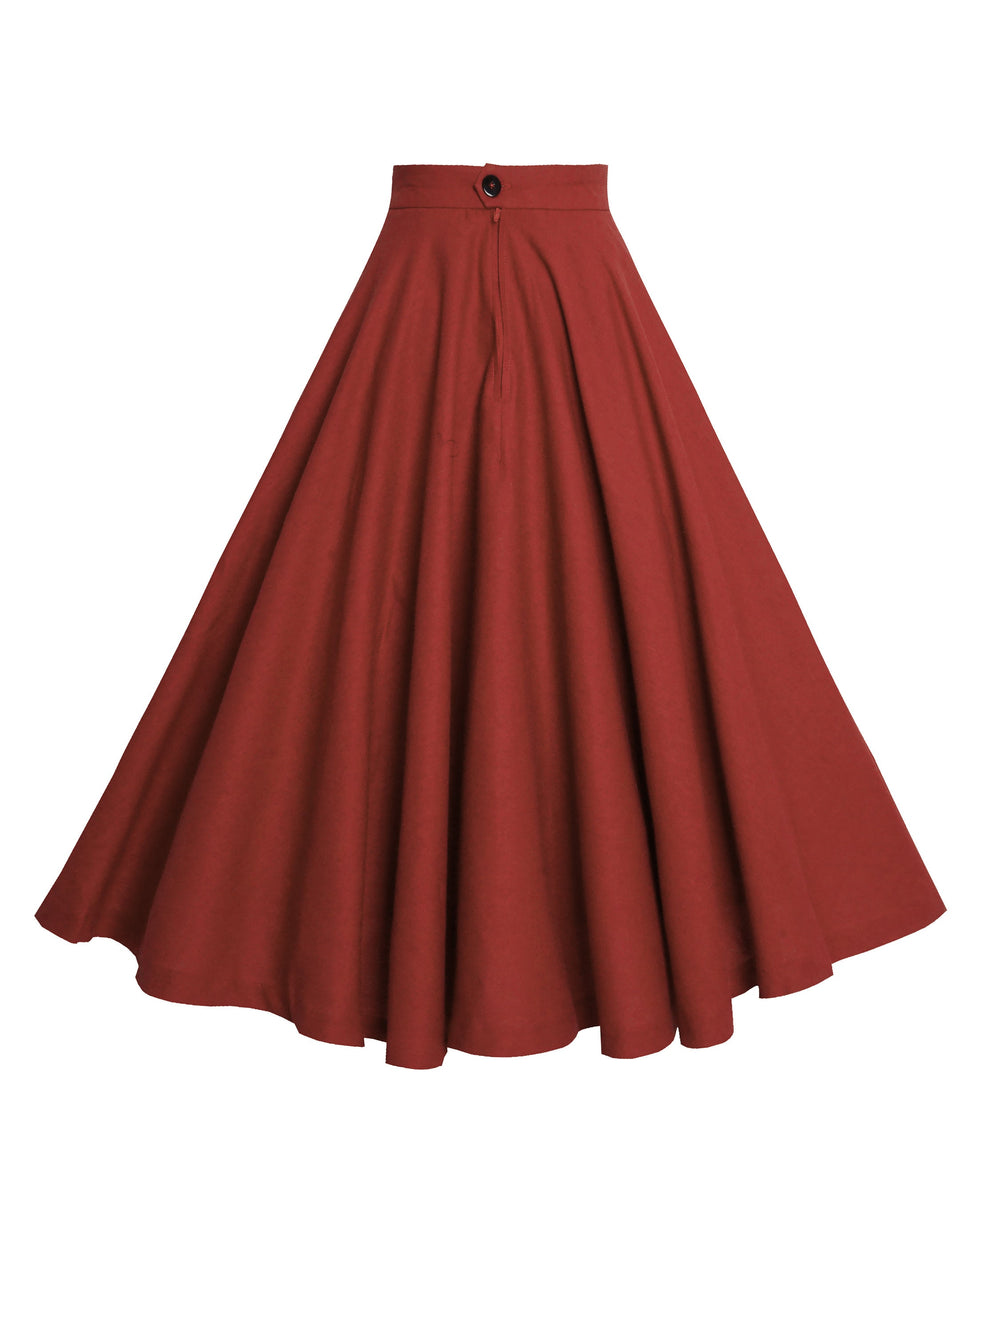 RTS - Size XL - Lindy Skirt in Scarlet Red Linen